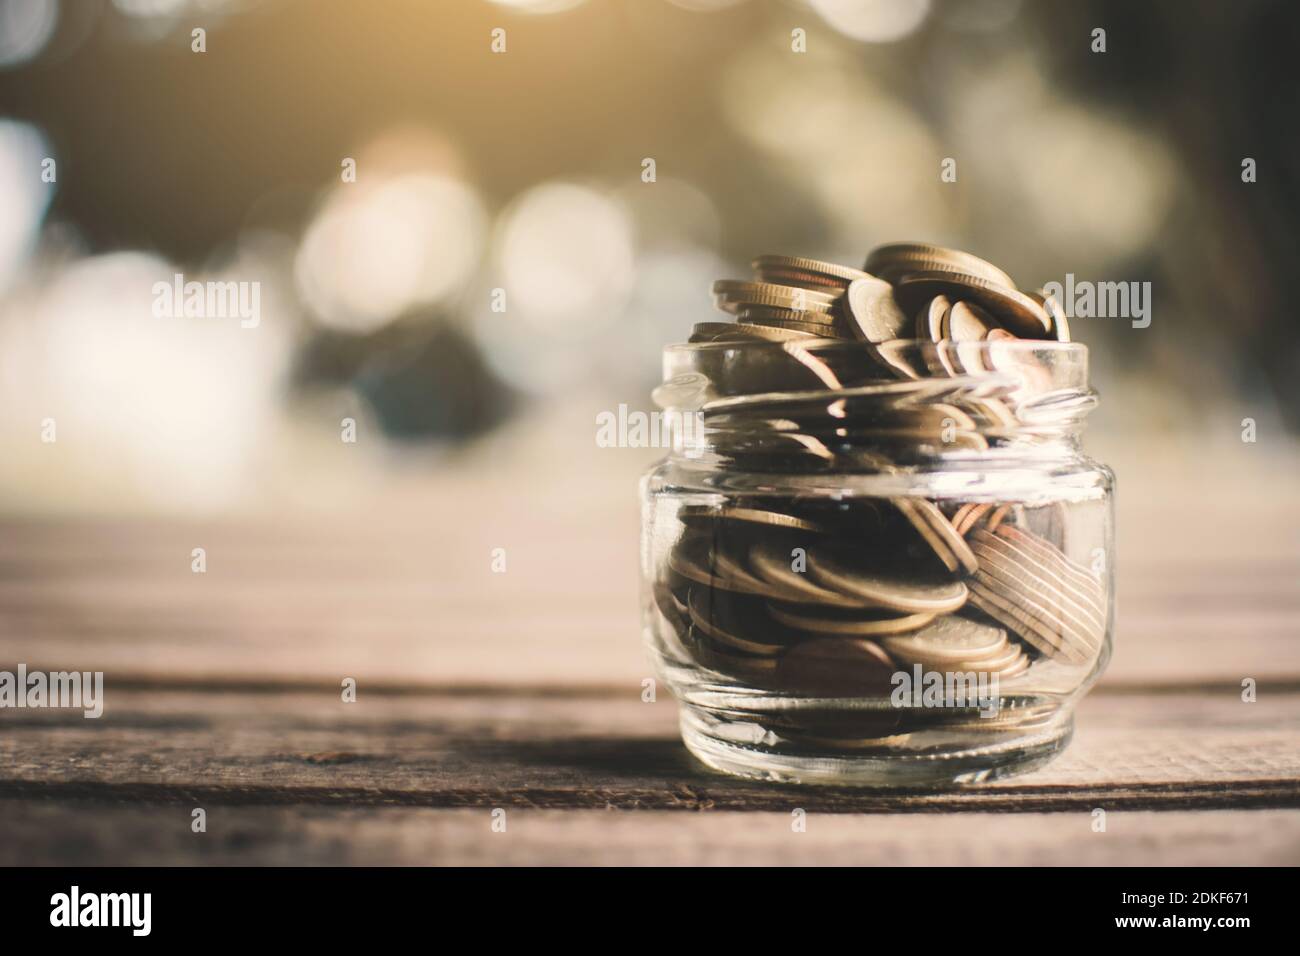 Close-up Of Coins In Glass Jar On Table Stock Photo